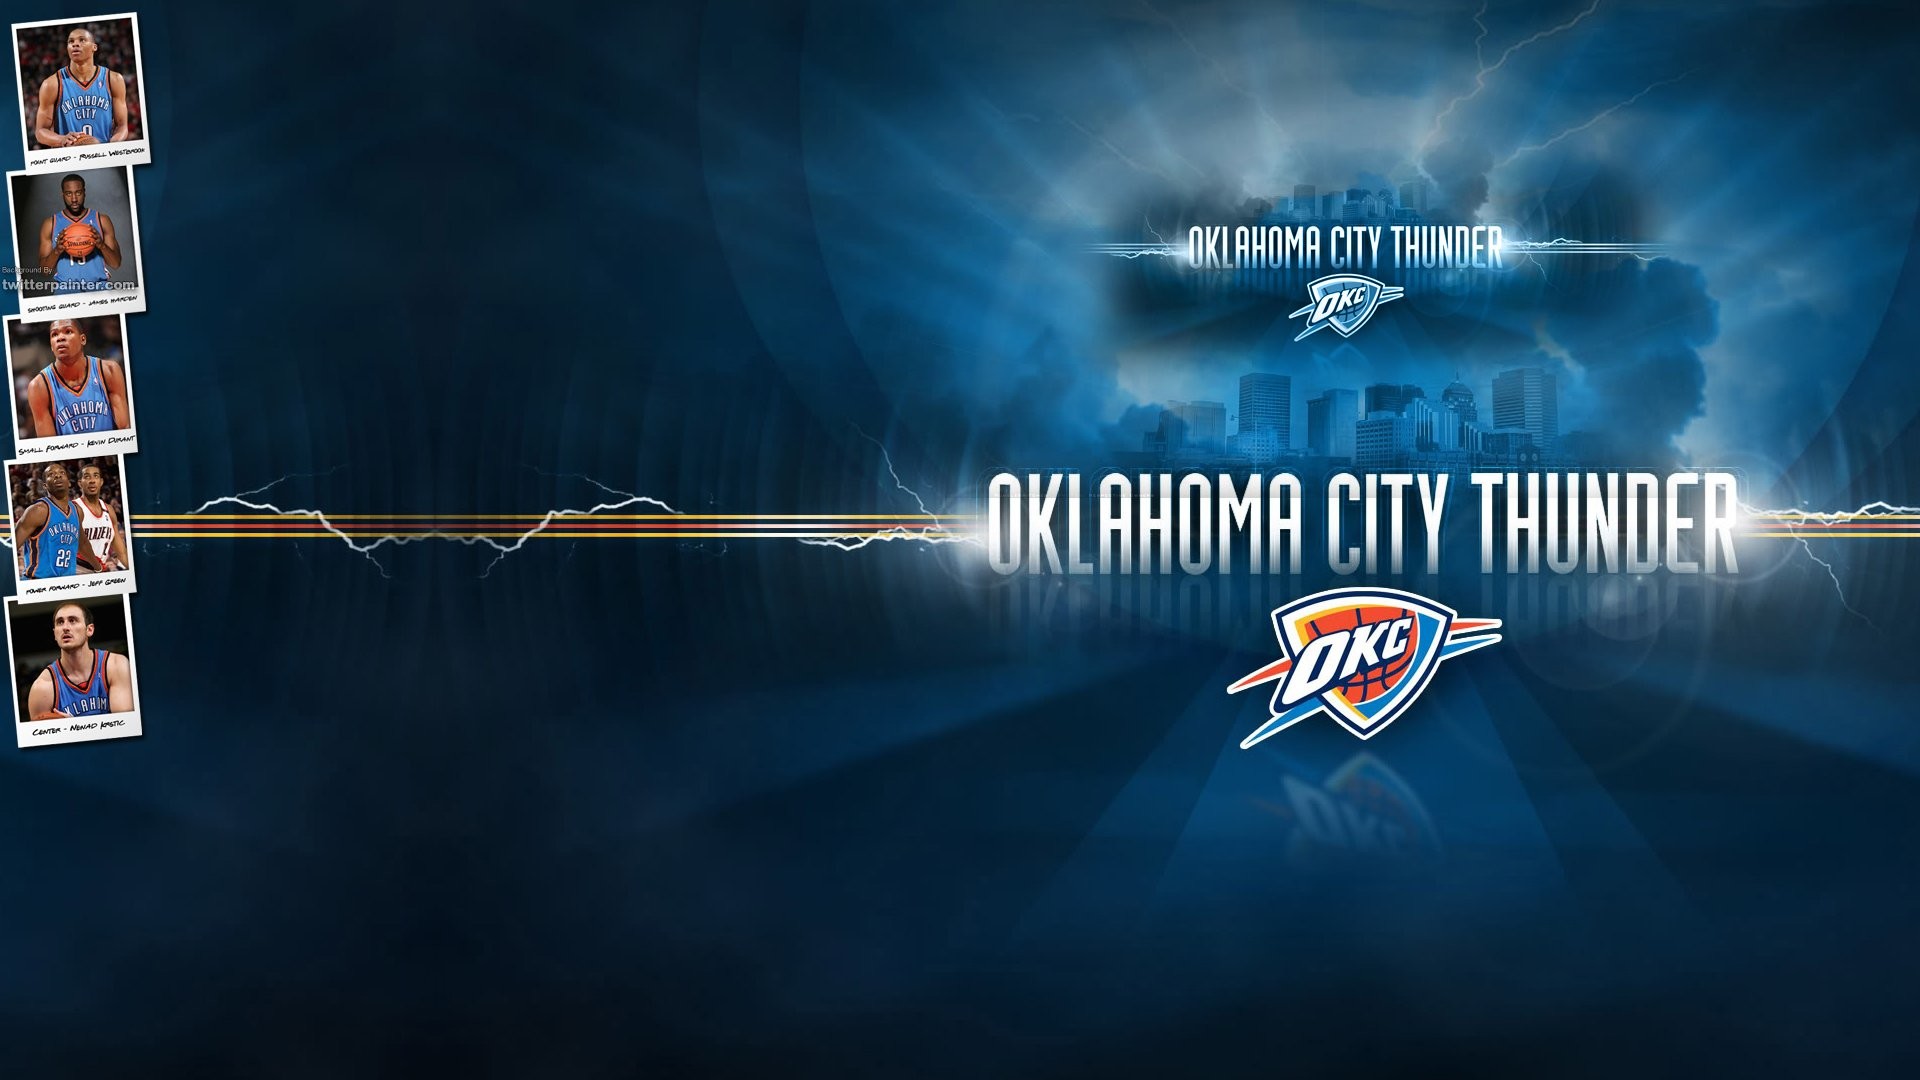 Free download Oklahoma City Thunder Wallpapers Full HD Pictures 3840x2400  for your Desktop Mobile  Tablet  Explore 94 OKC Thunder Wallpapers   Thunder Wallpaper OKC Thunder Wallpaper 2016 OKC Thunder Wallpaper 2016  2017